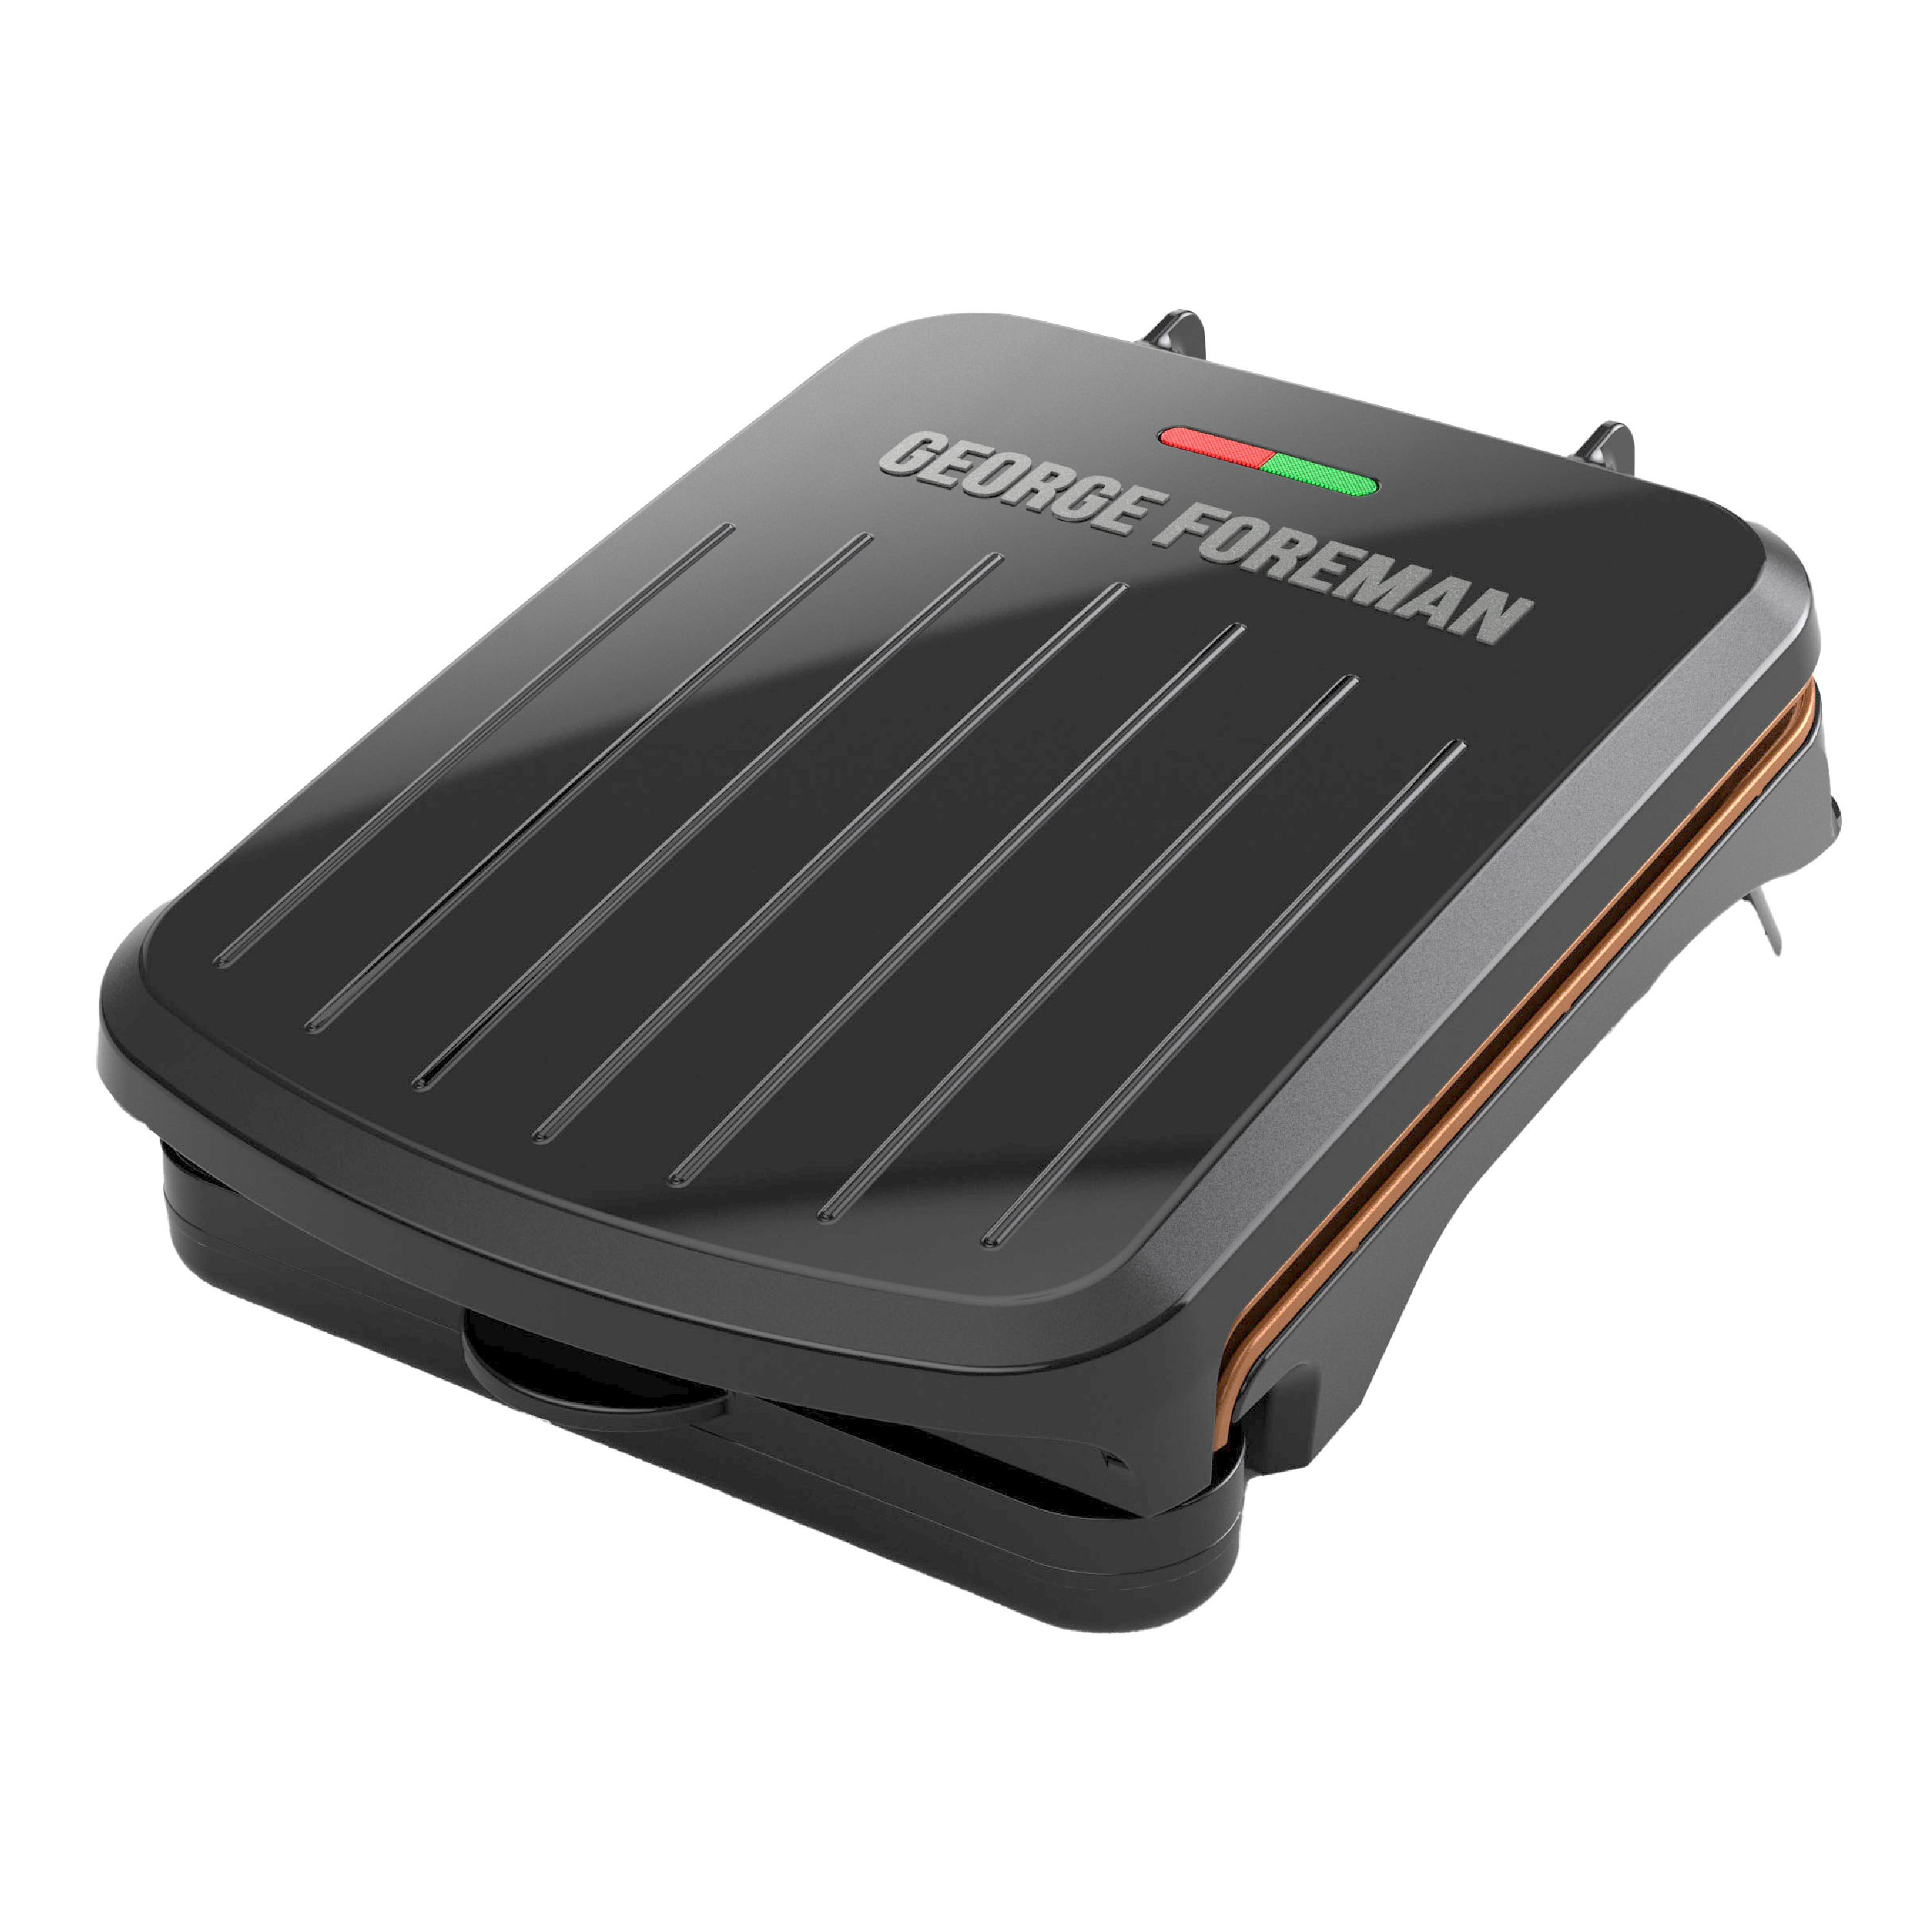 6-Serving Removable Plate & Panini Grill - Black